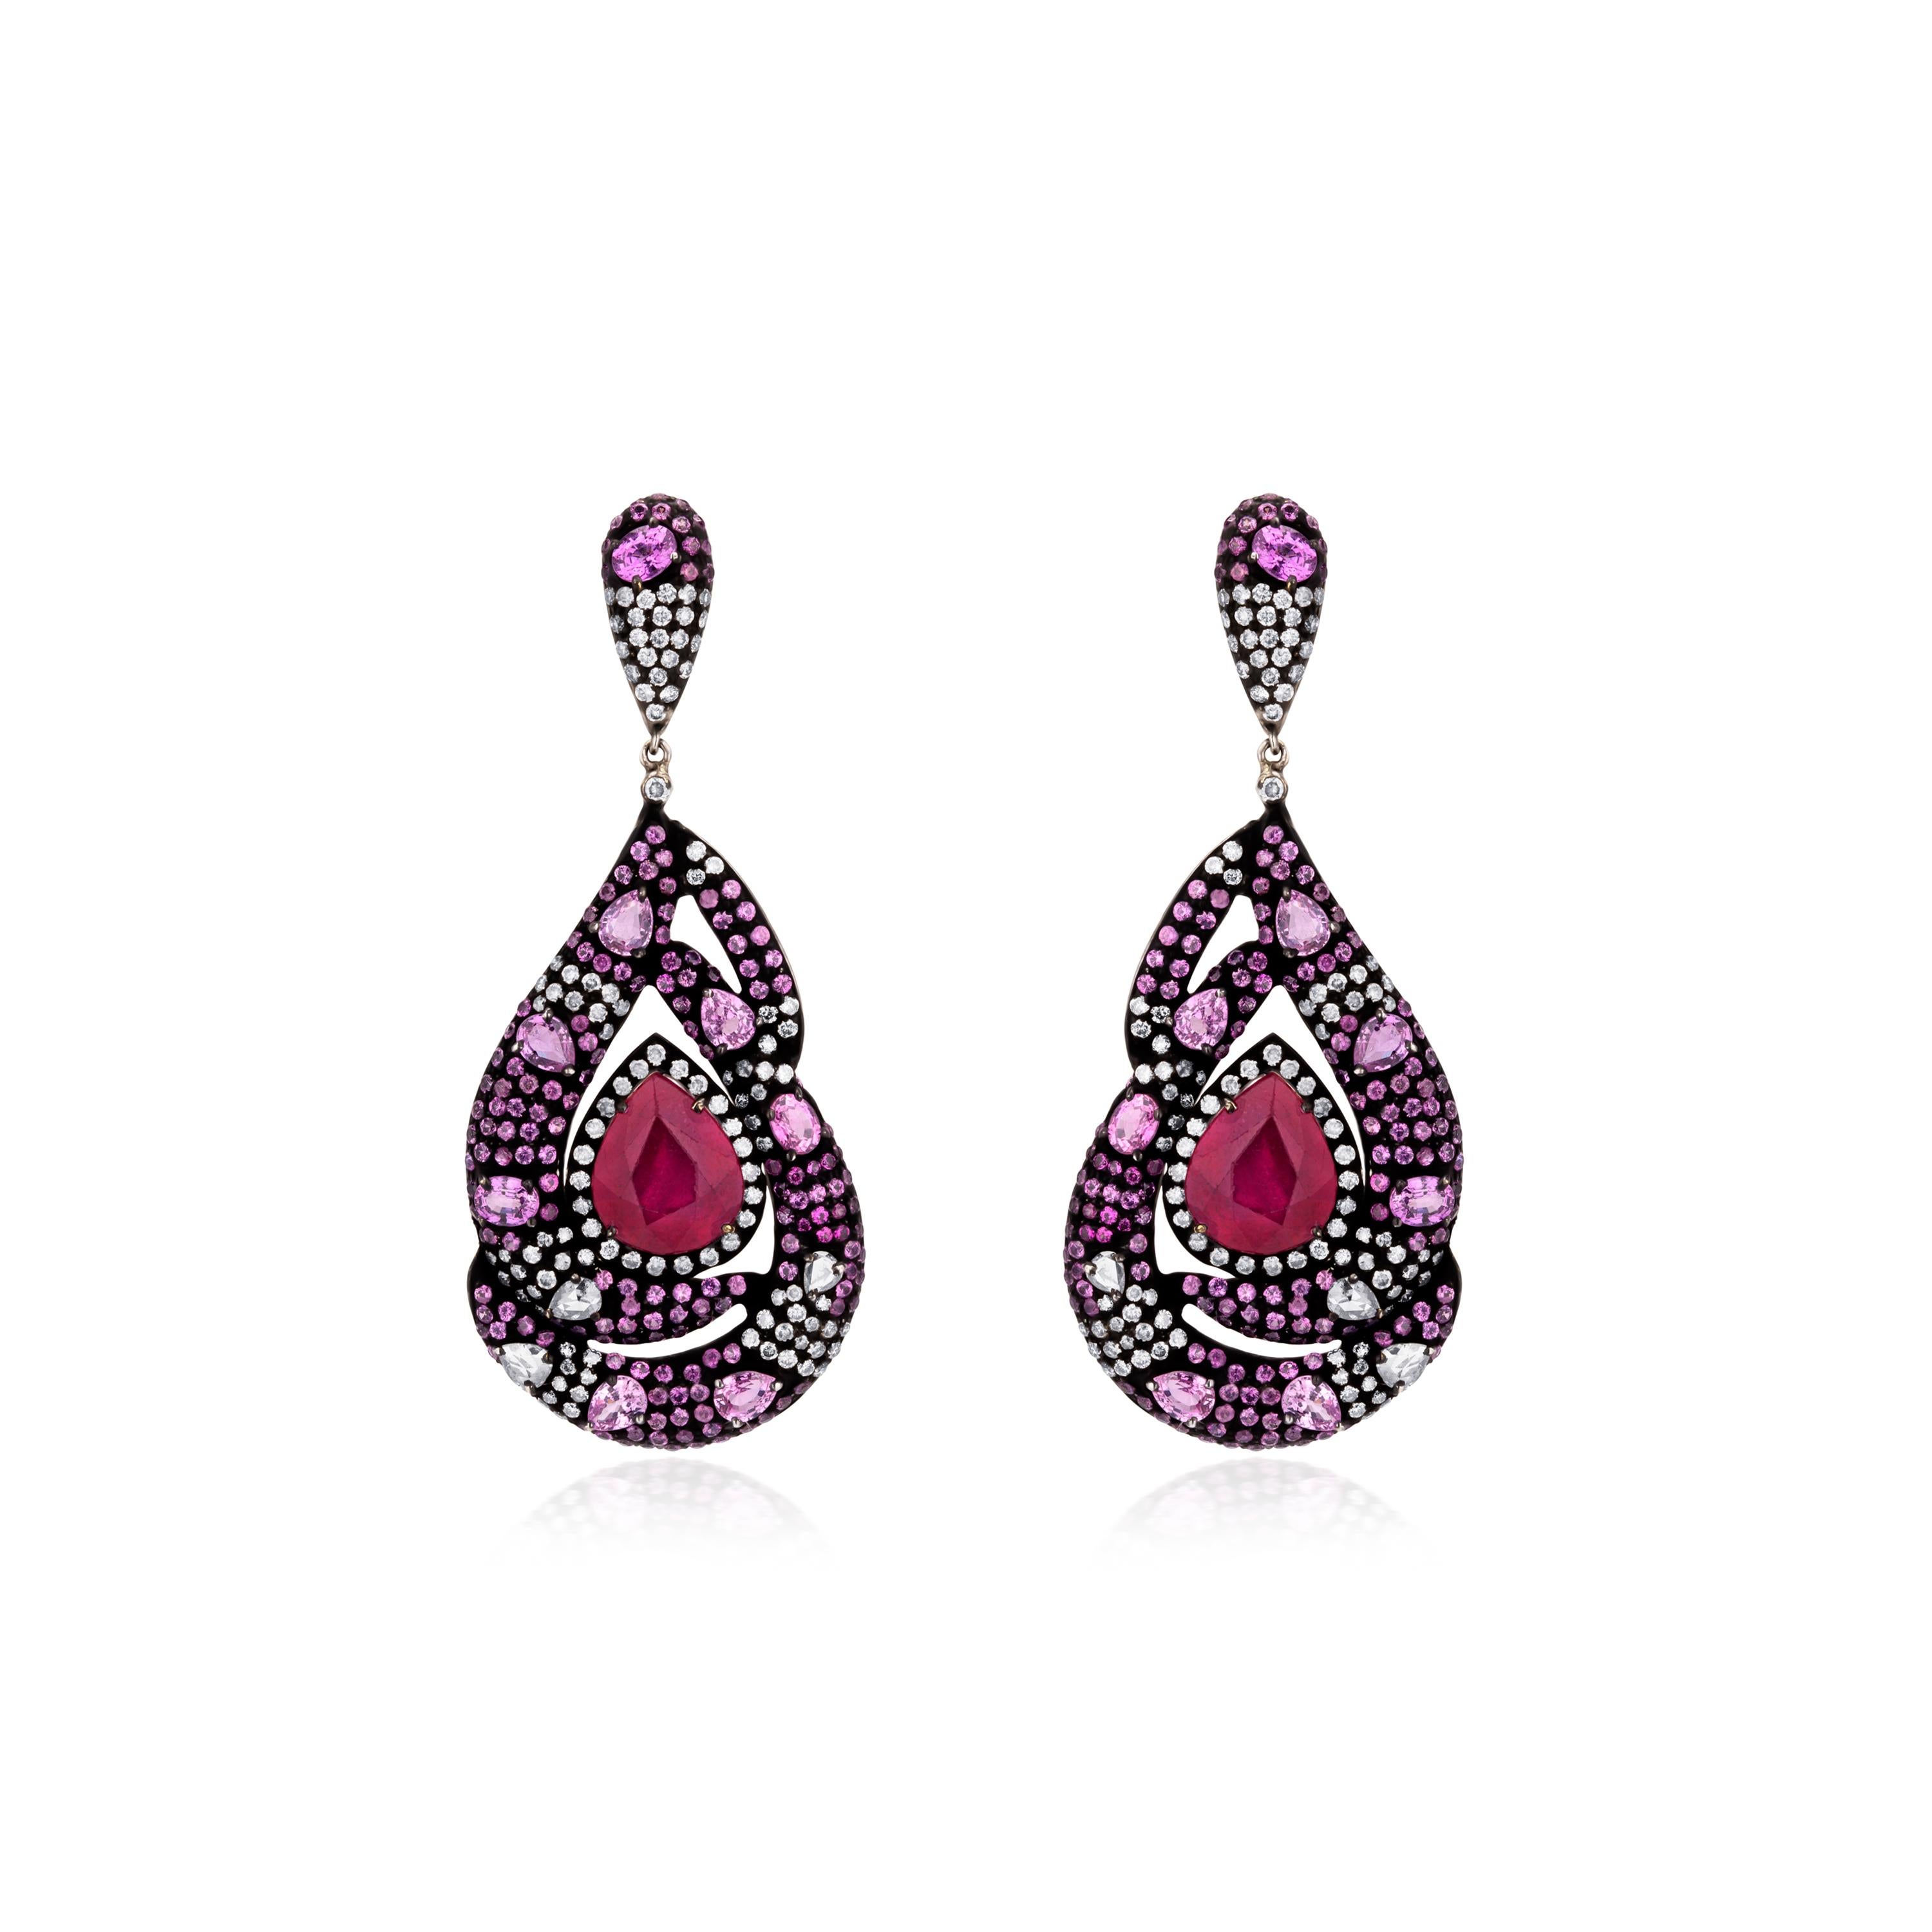  Each earring is composed of one pear cut ruby framed within elongated curvilinear drops embellished with pink sapphires and diamonds. The drops present a picture of a mythical snake protecting a precious stone. The black rhodium finish bestows